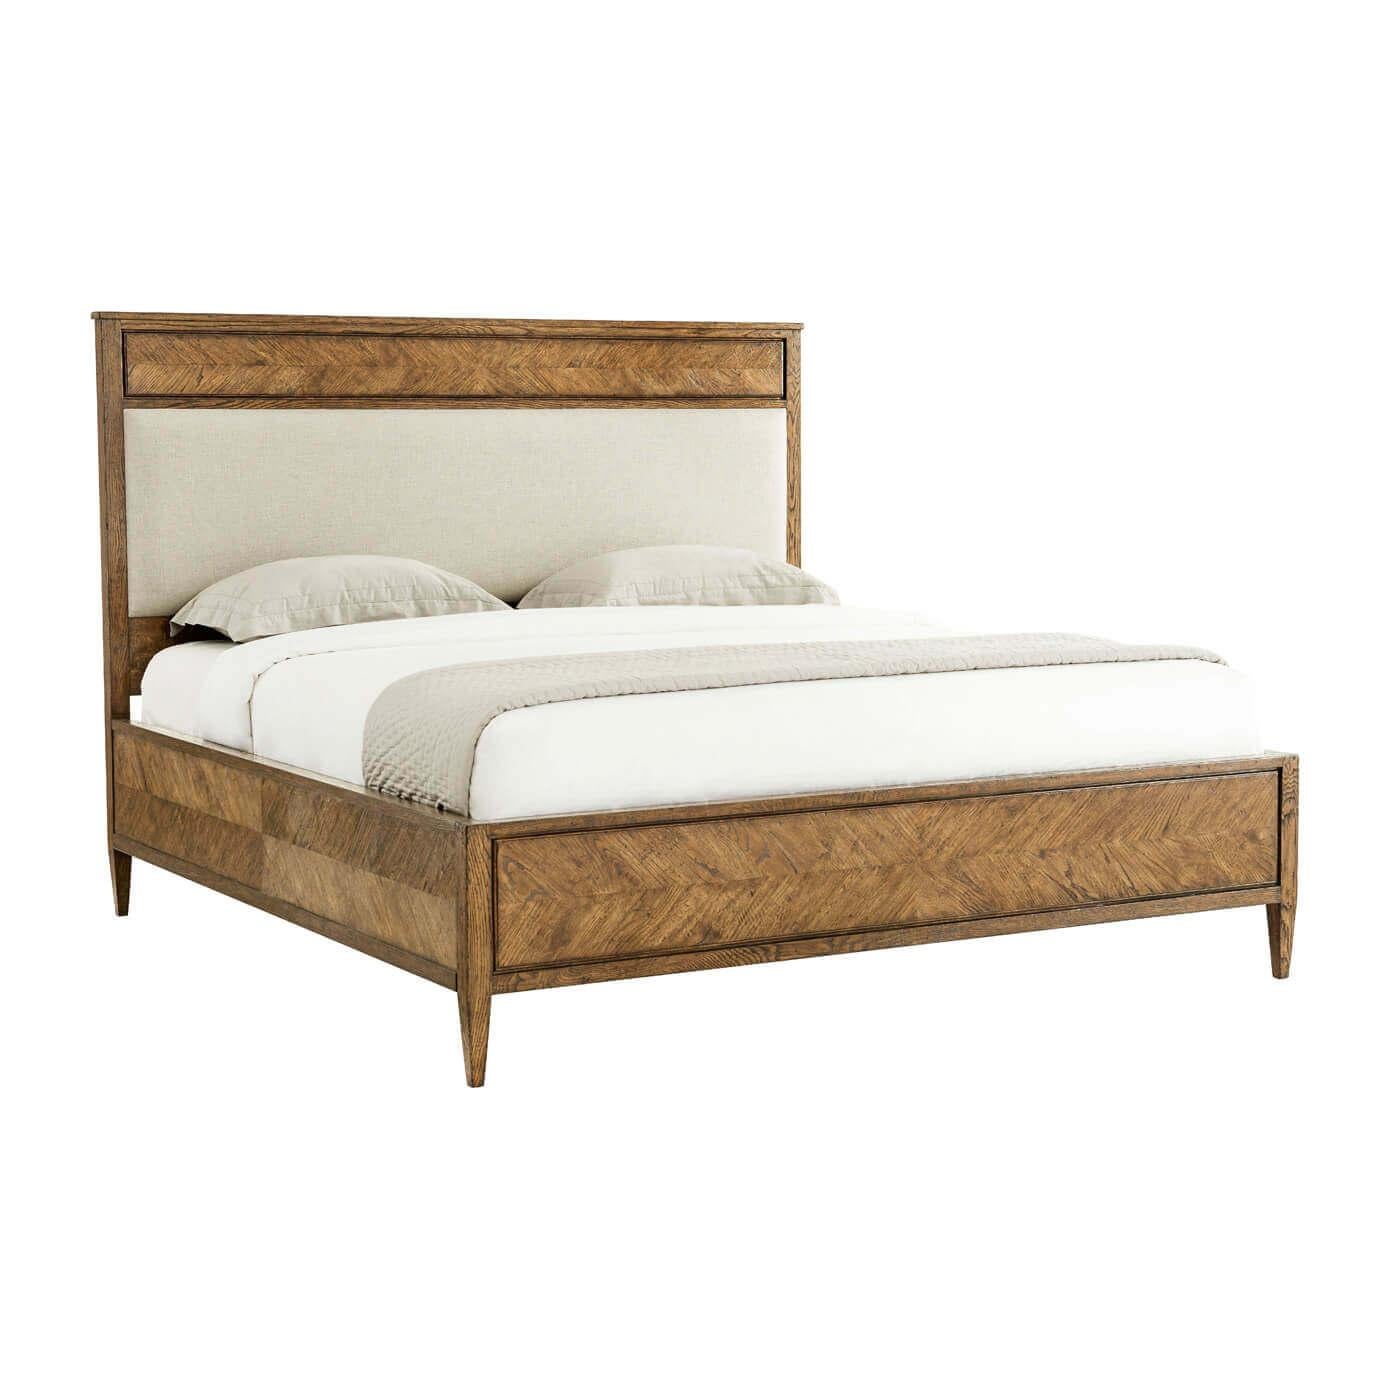 Crafted with rustic oak it has an upholstered panel headboard with framed oak side rails and tapered finished legs.

Dimensions: 77.5